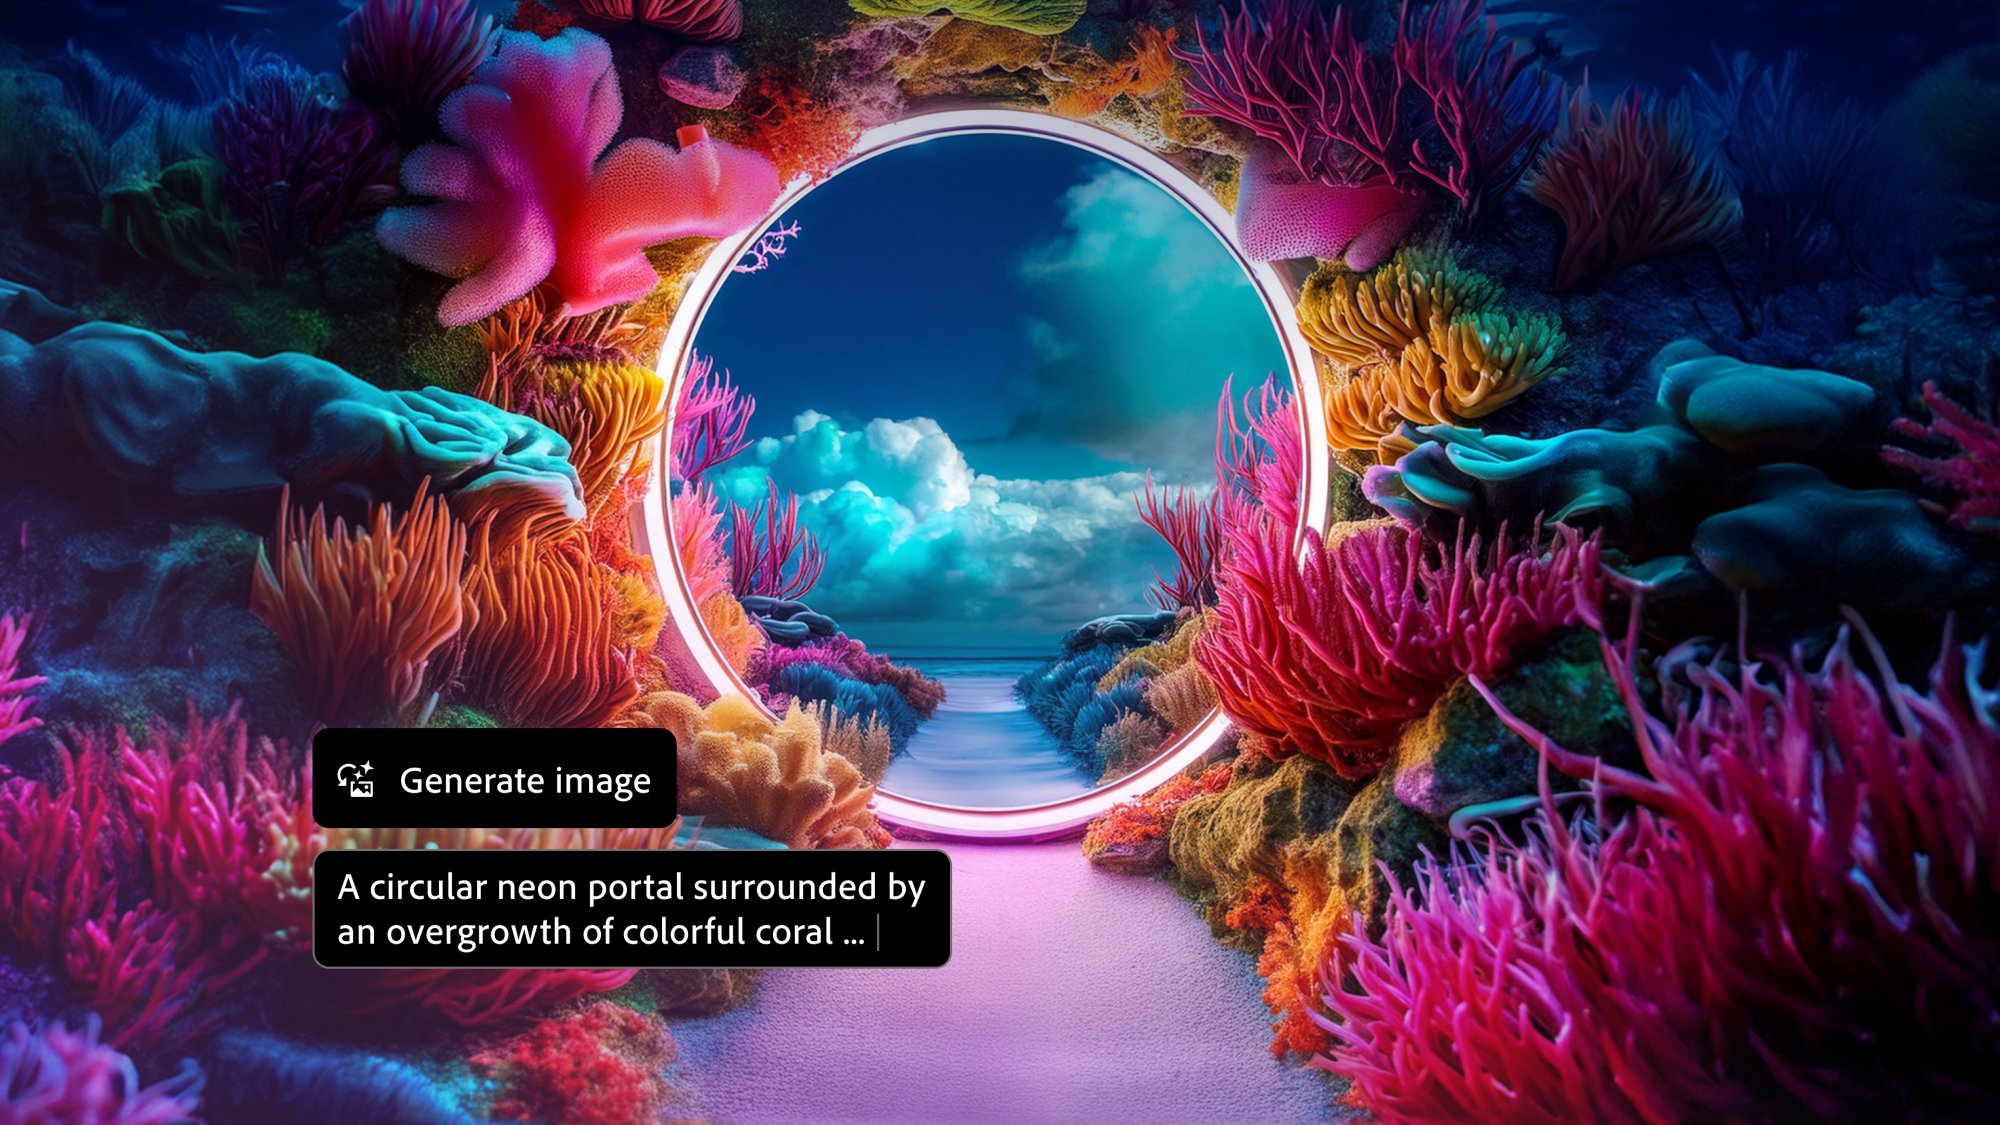 ai-generated image of a neon portal surrounded by coral with the generate image prompt in the lower lefthand corner